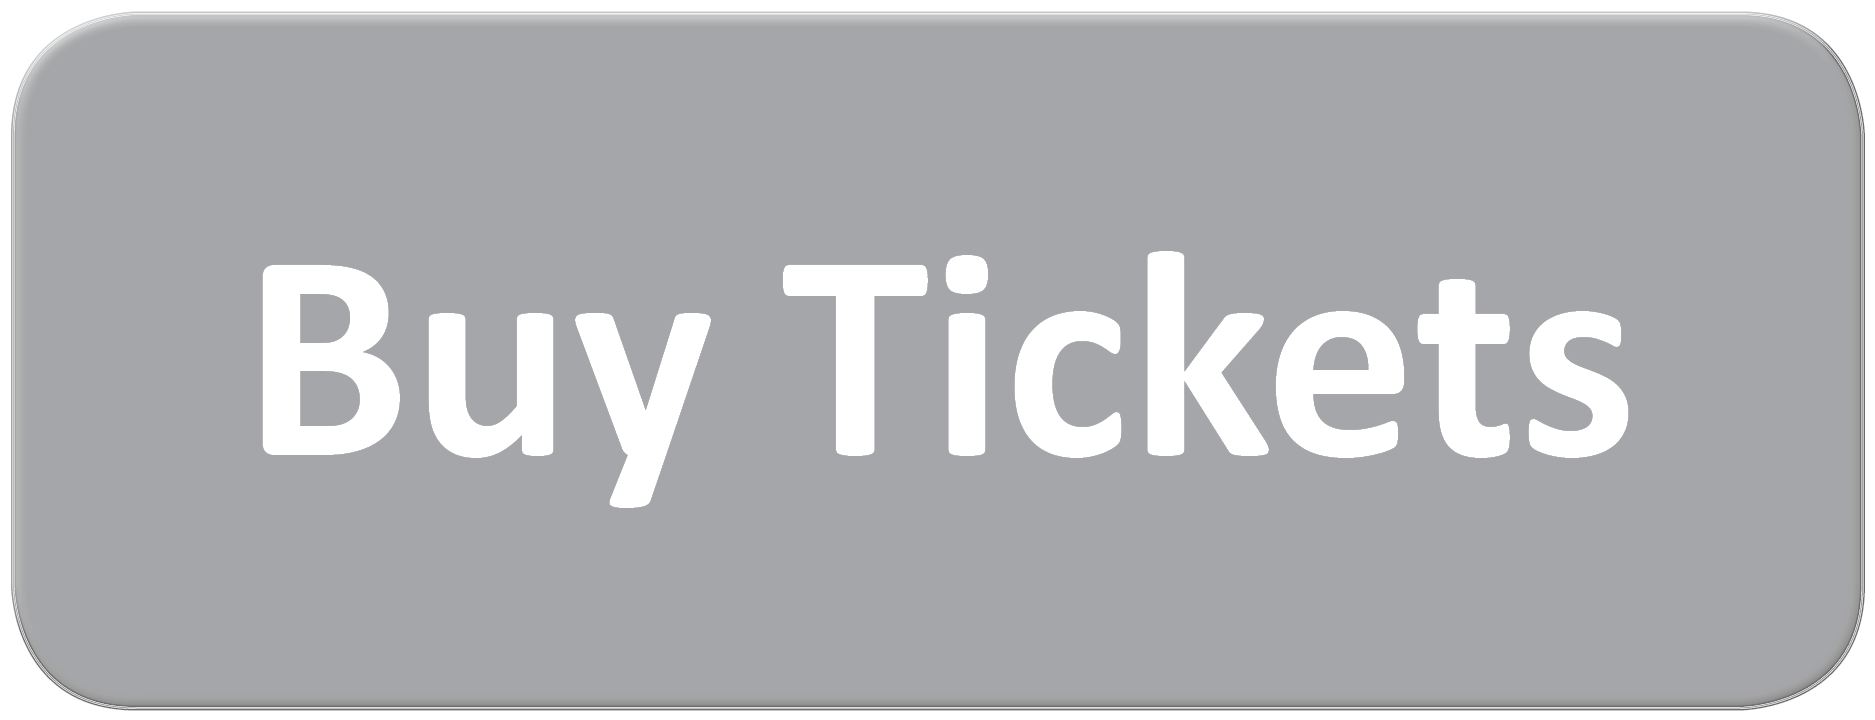 Buy Tickets Button Graphic PNG image